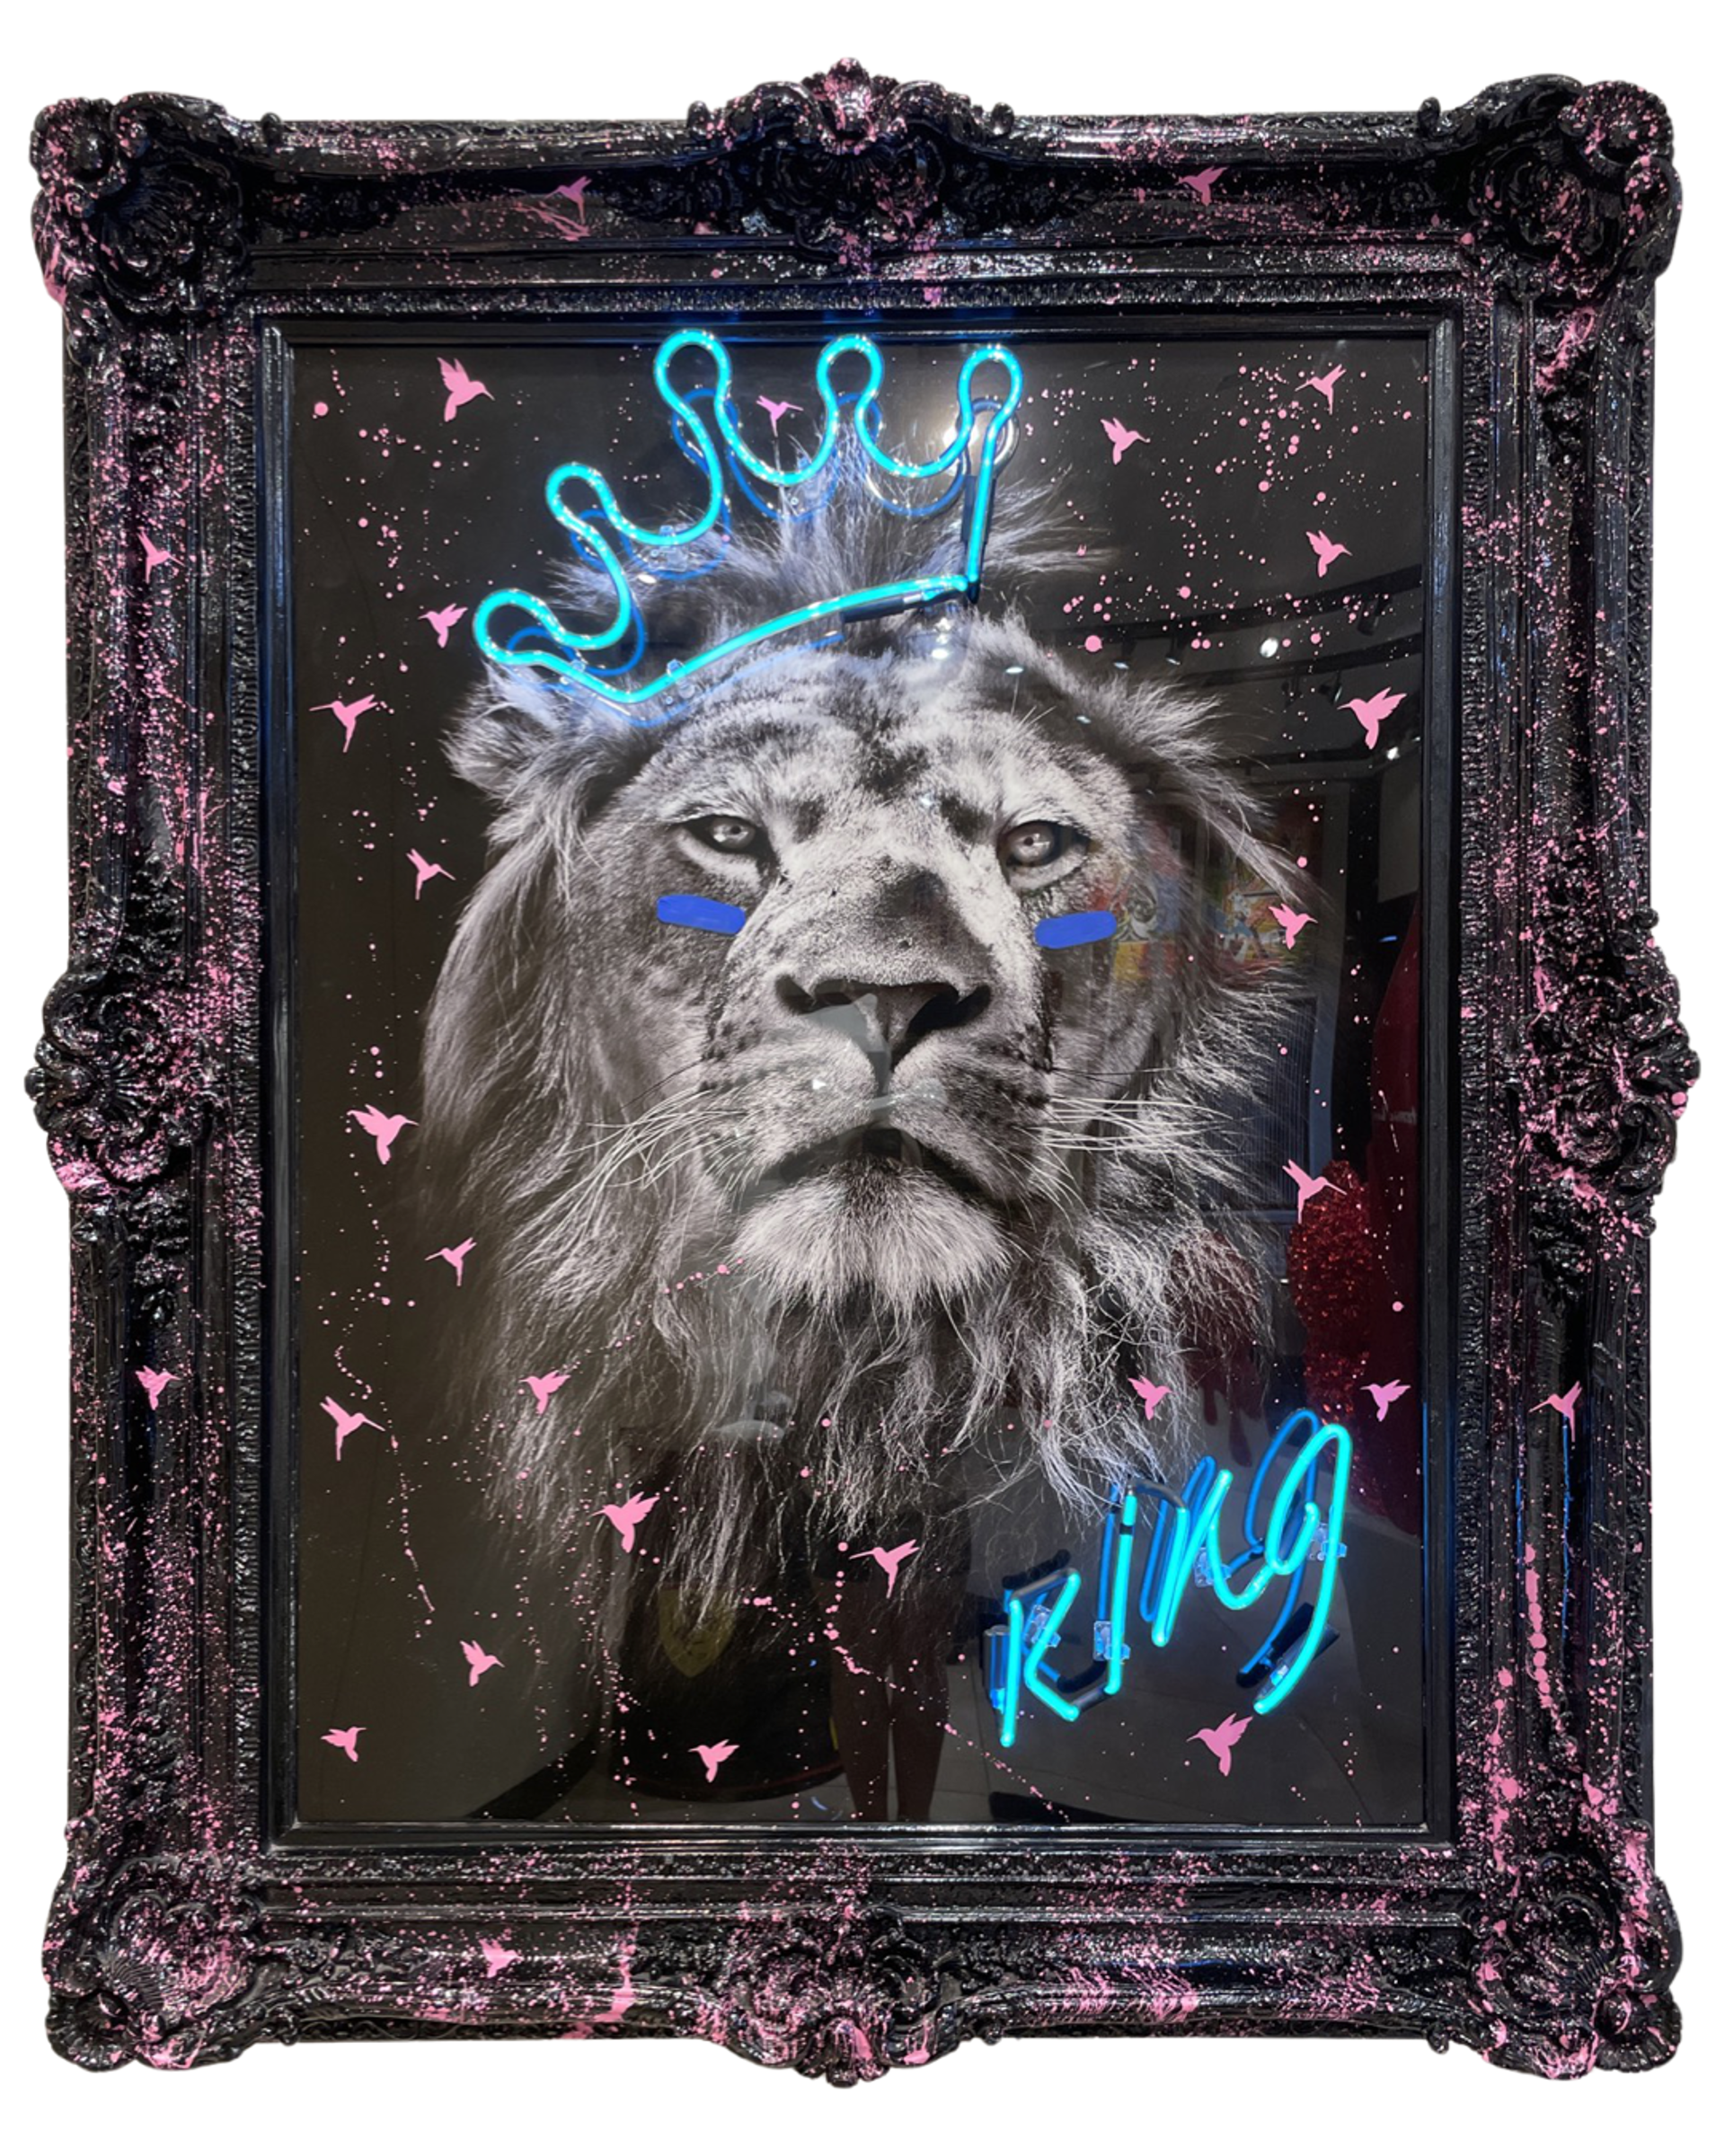 " The King " by Behind Pink Walls